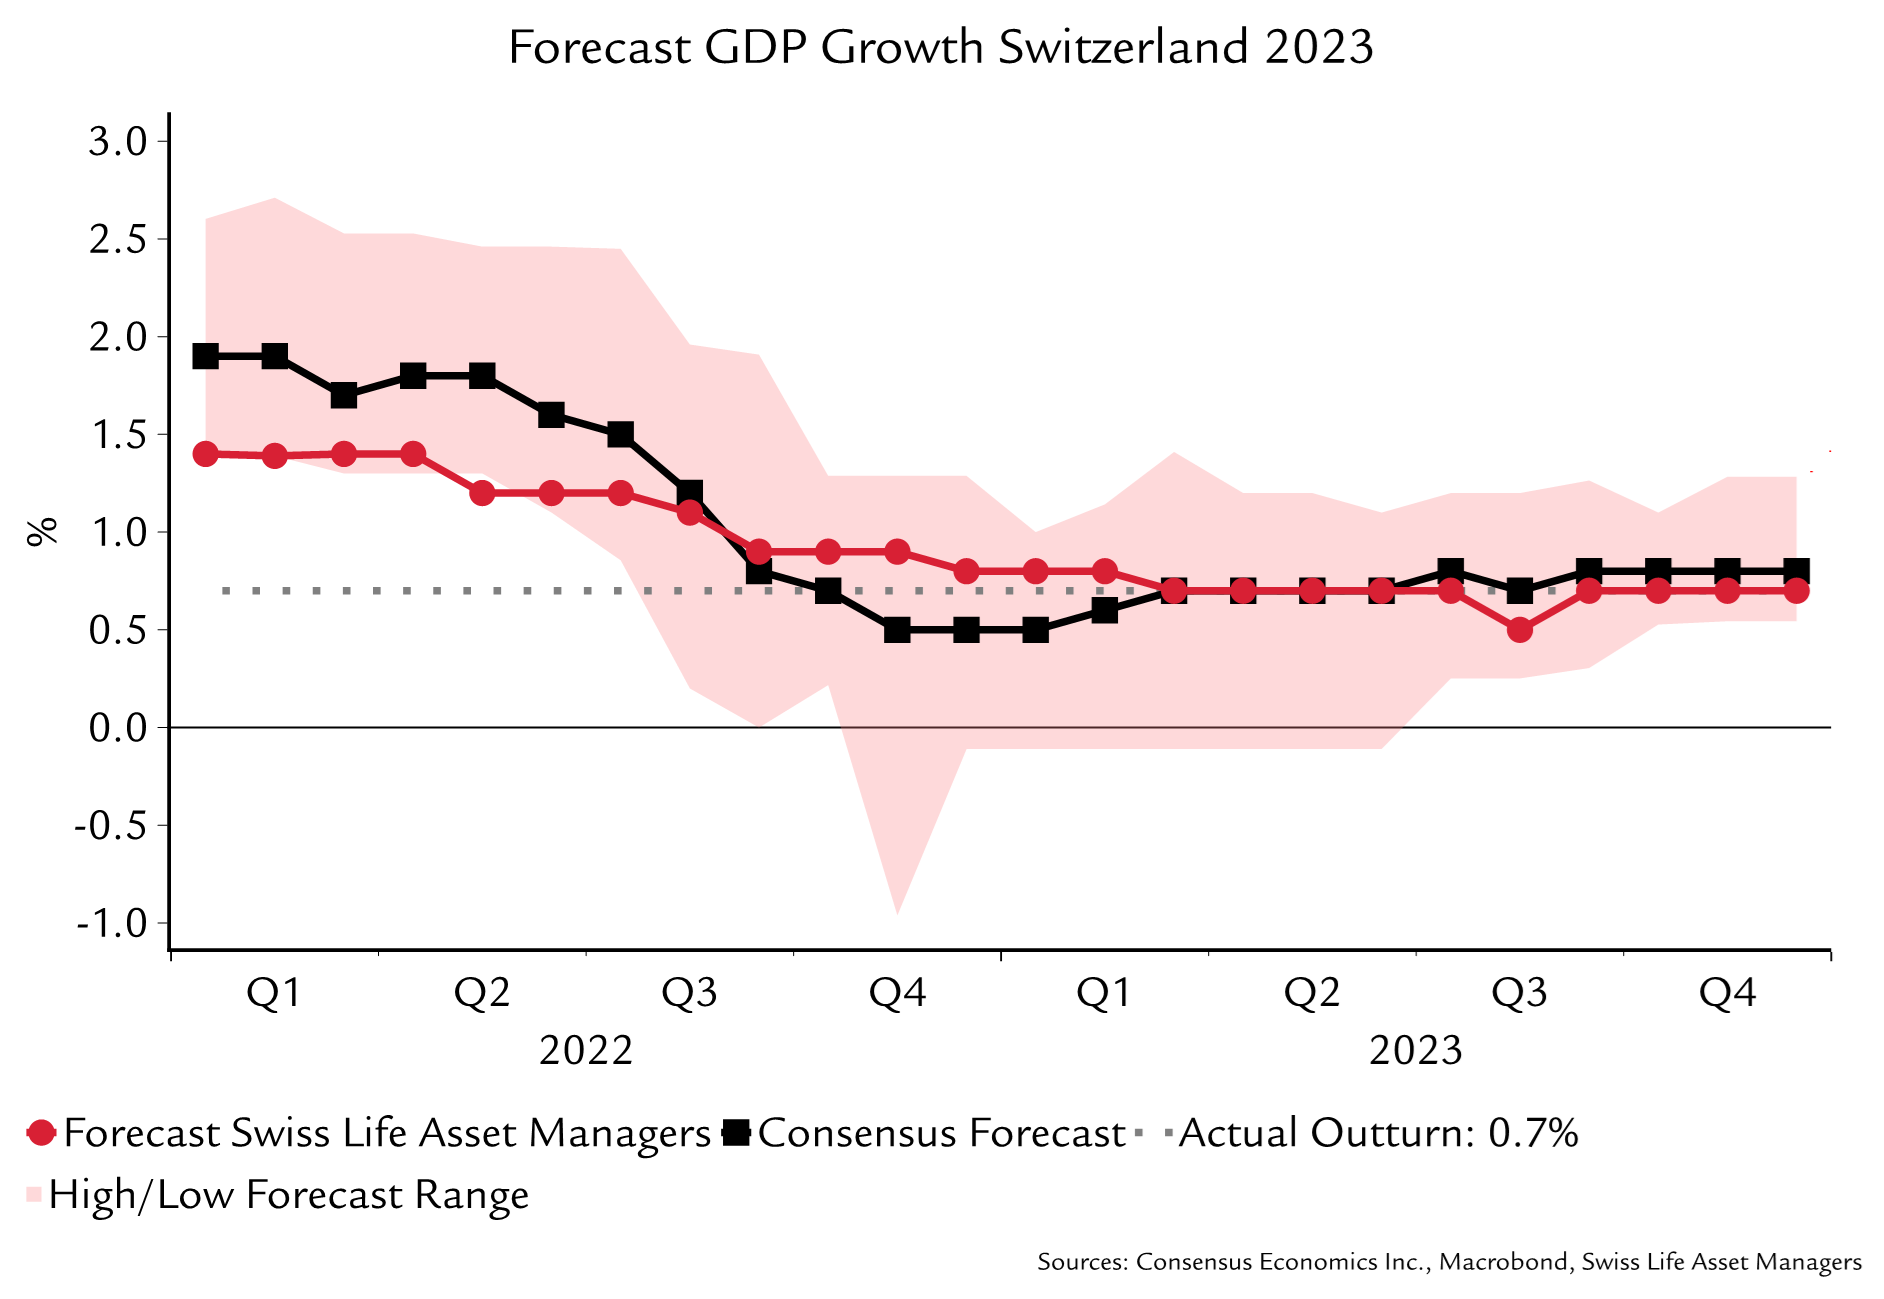 2023 GDP Switzerland growth forecast and actual result